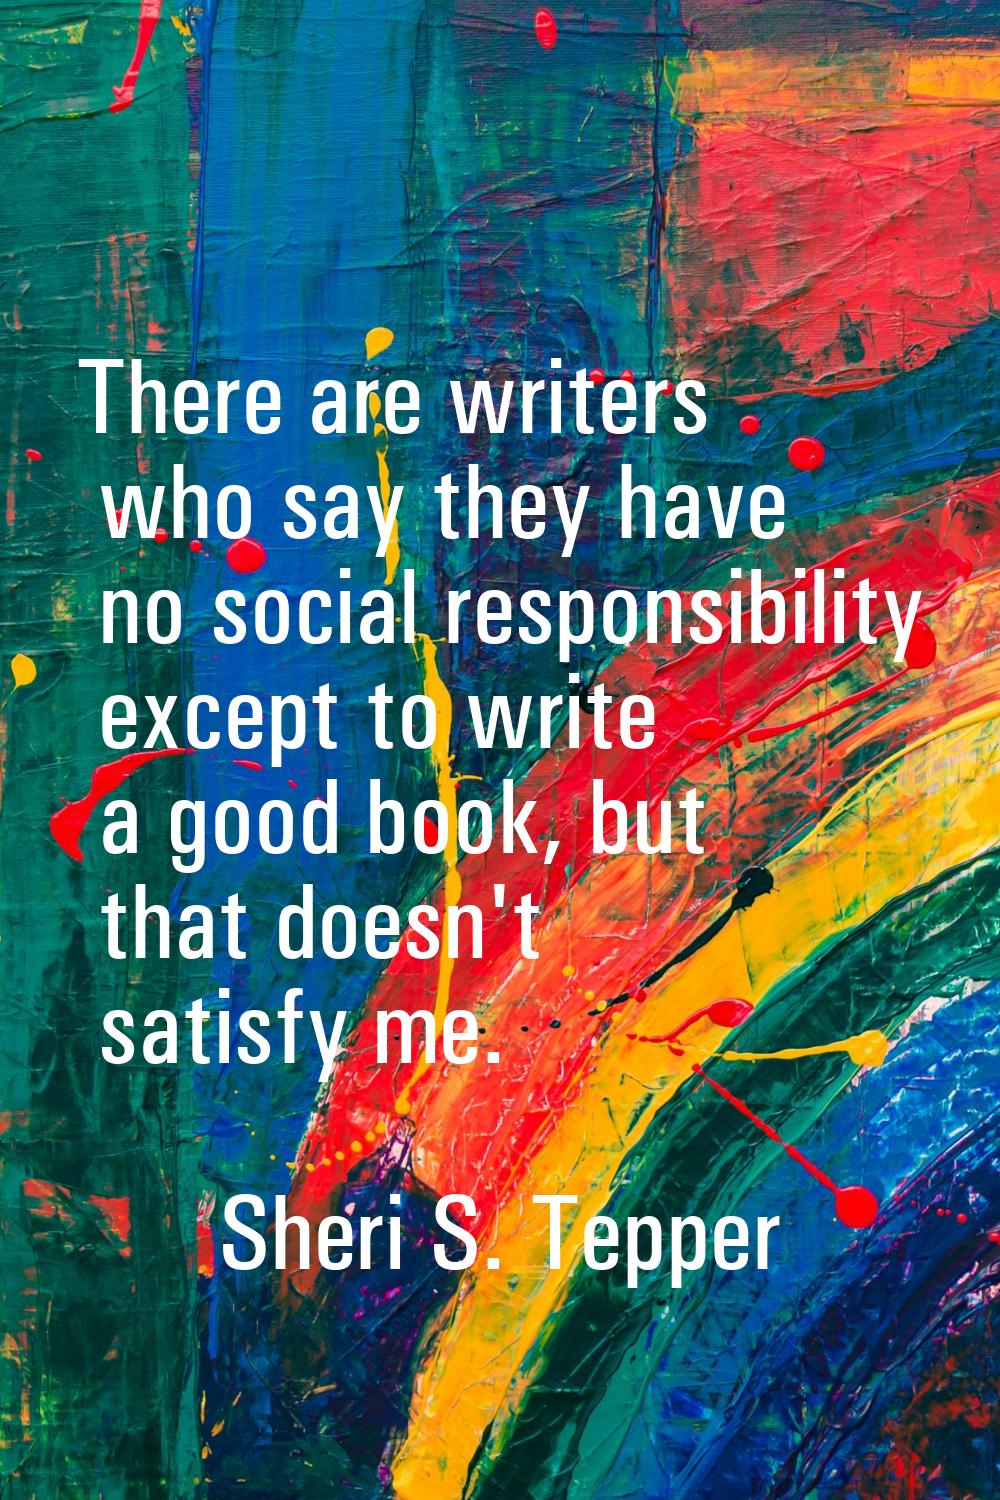 There are writers who say they have no social responsibility except to write a good book, but that 